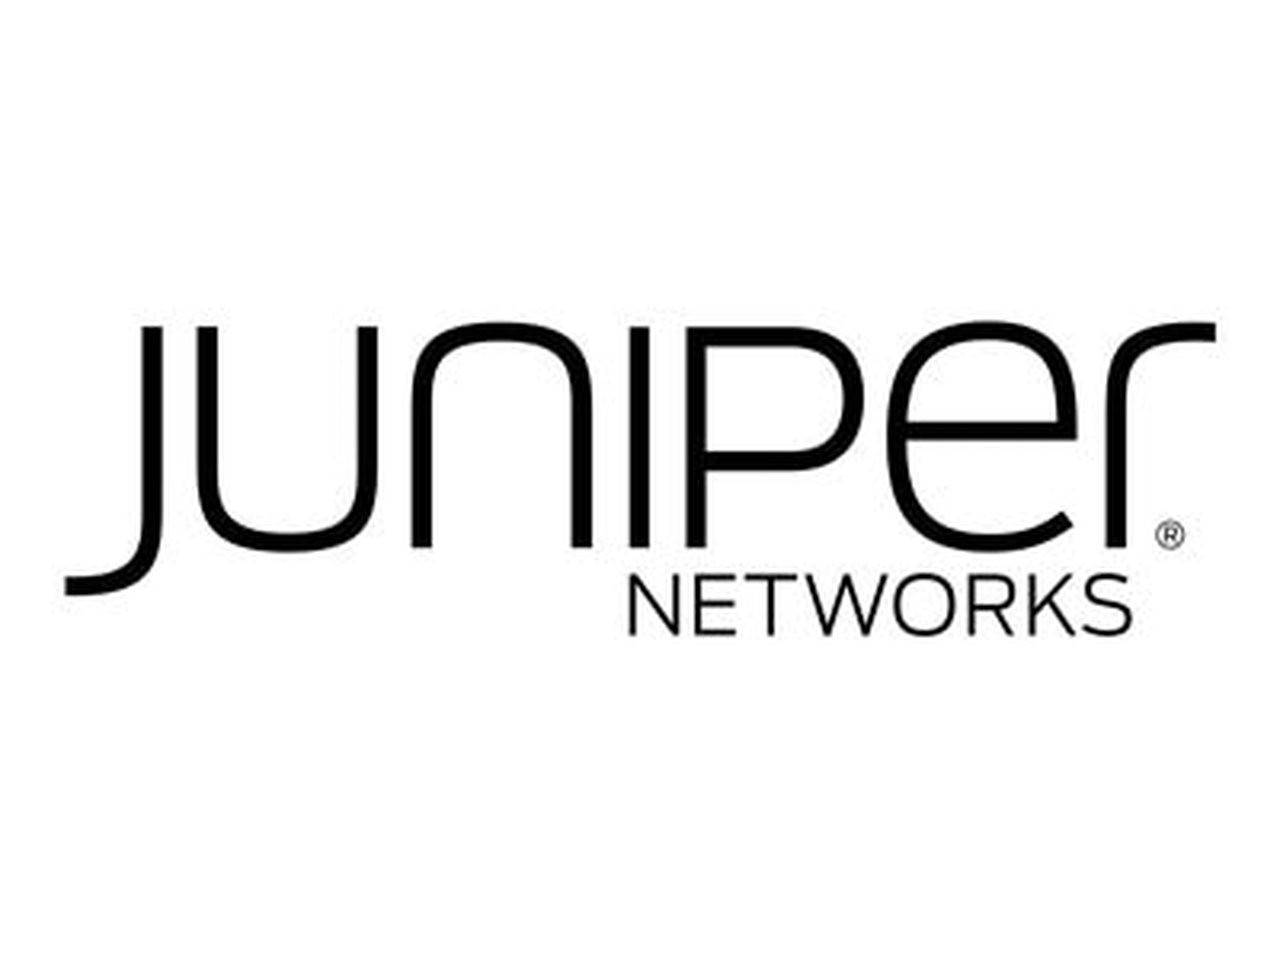 Juniper Service, Srx4200 Ips, Appsecure, Url Filtering, Cloud Av And As, Skyatp, Sec Intel, With Software Support, 1 Year